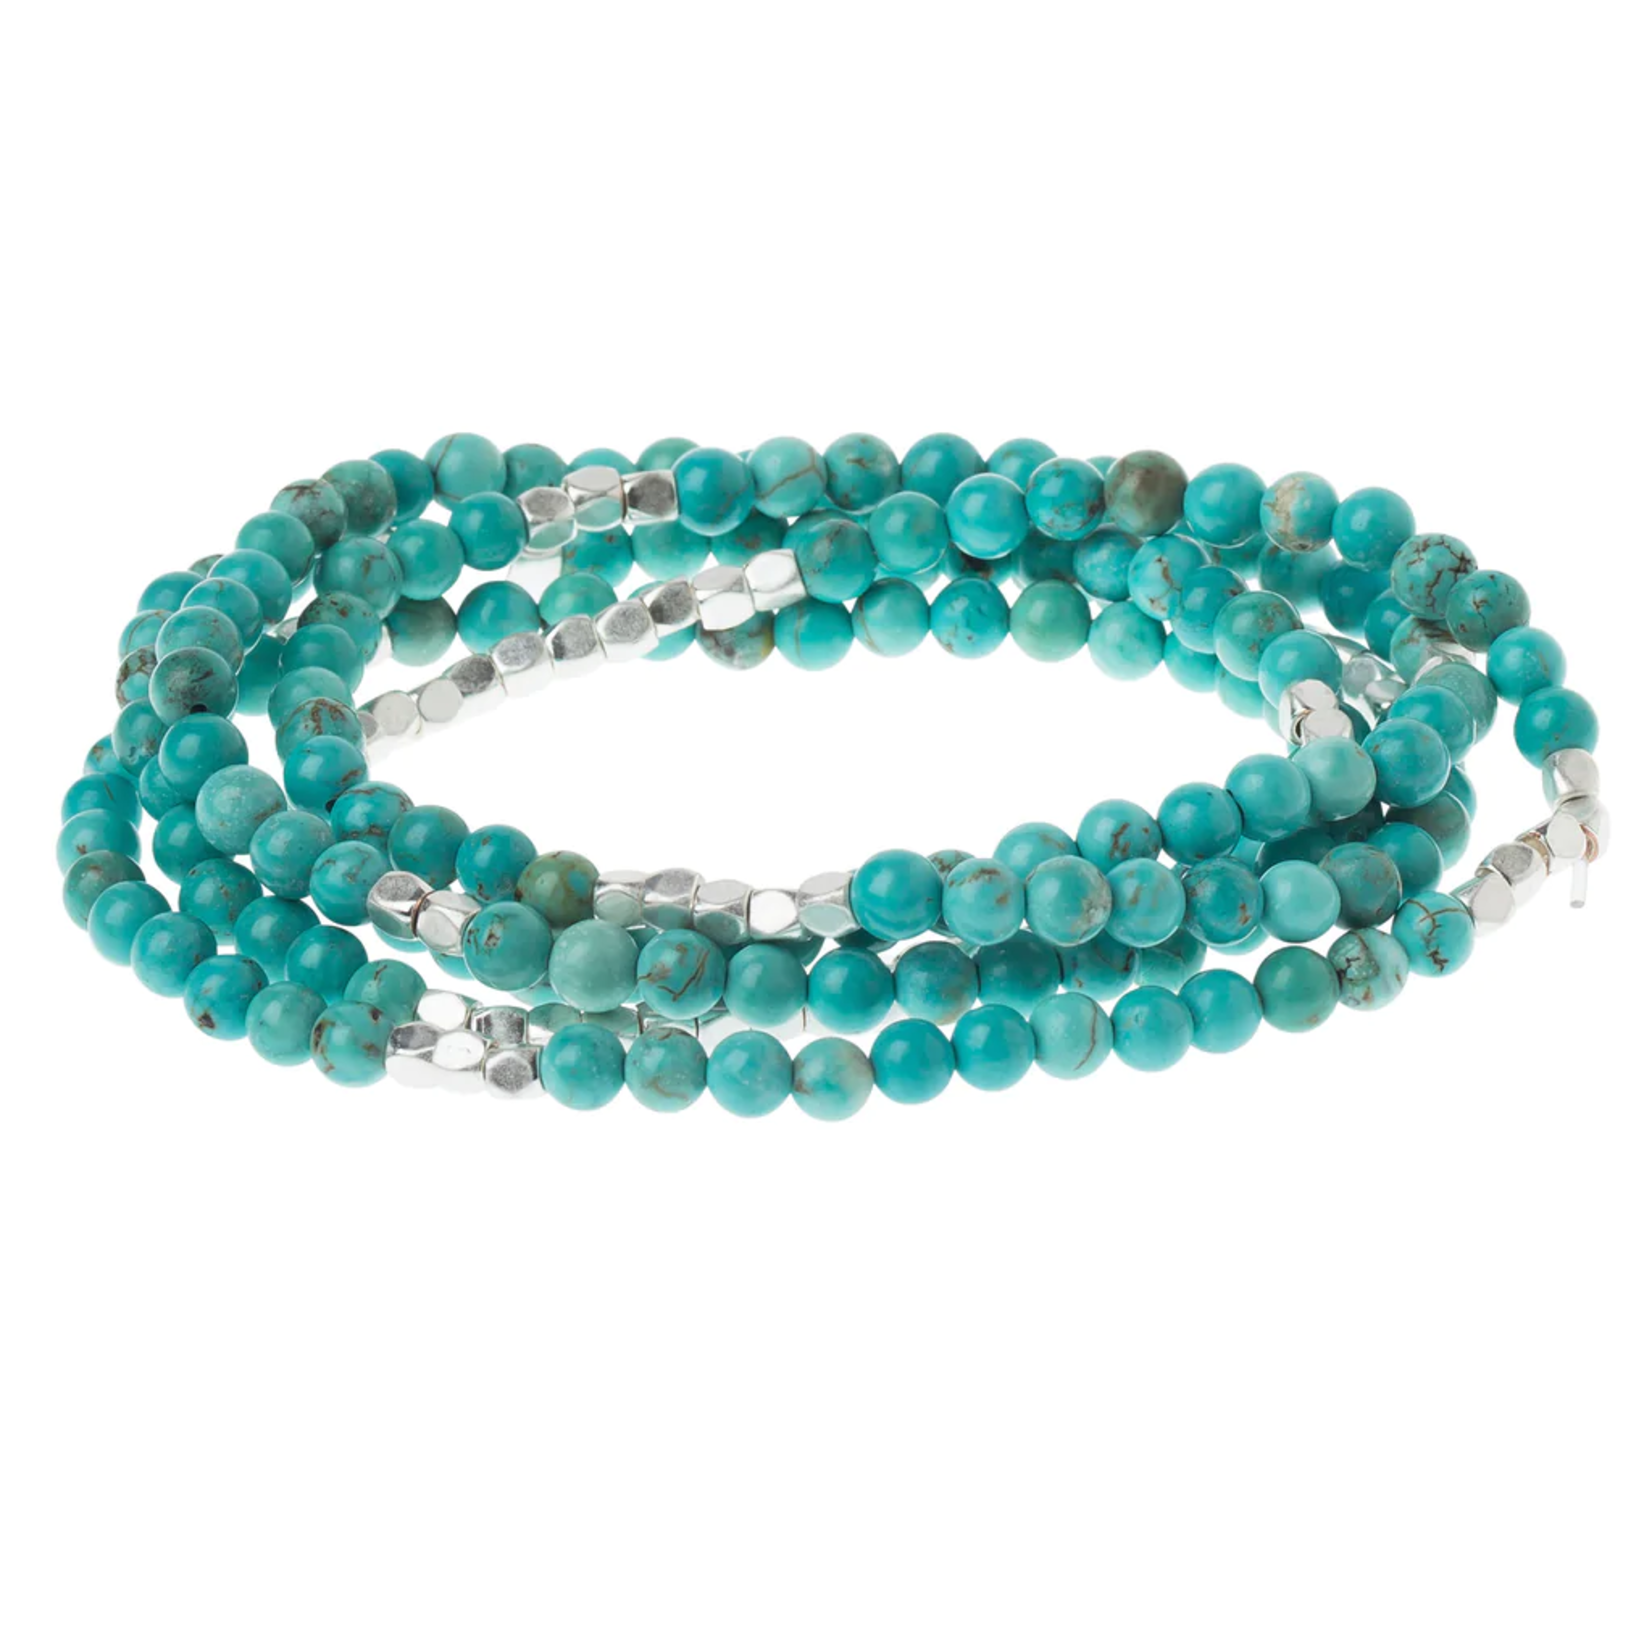 Scout Wrap Bracelet/Necklace Turquoise - Stone of Sky